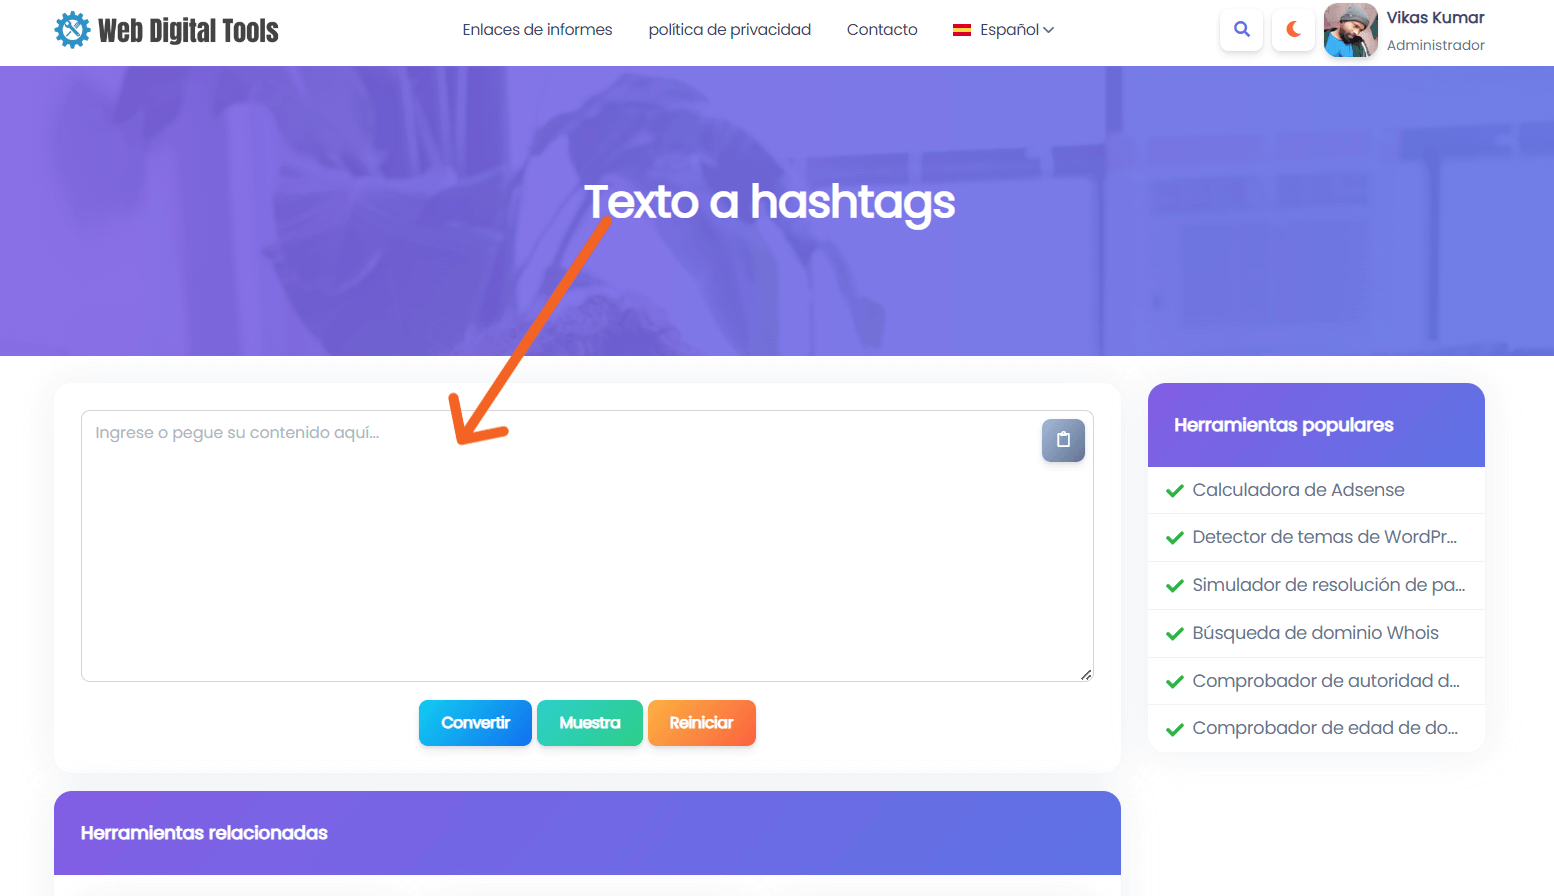 text-to-hashtags